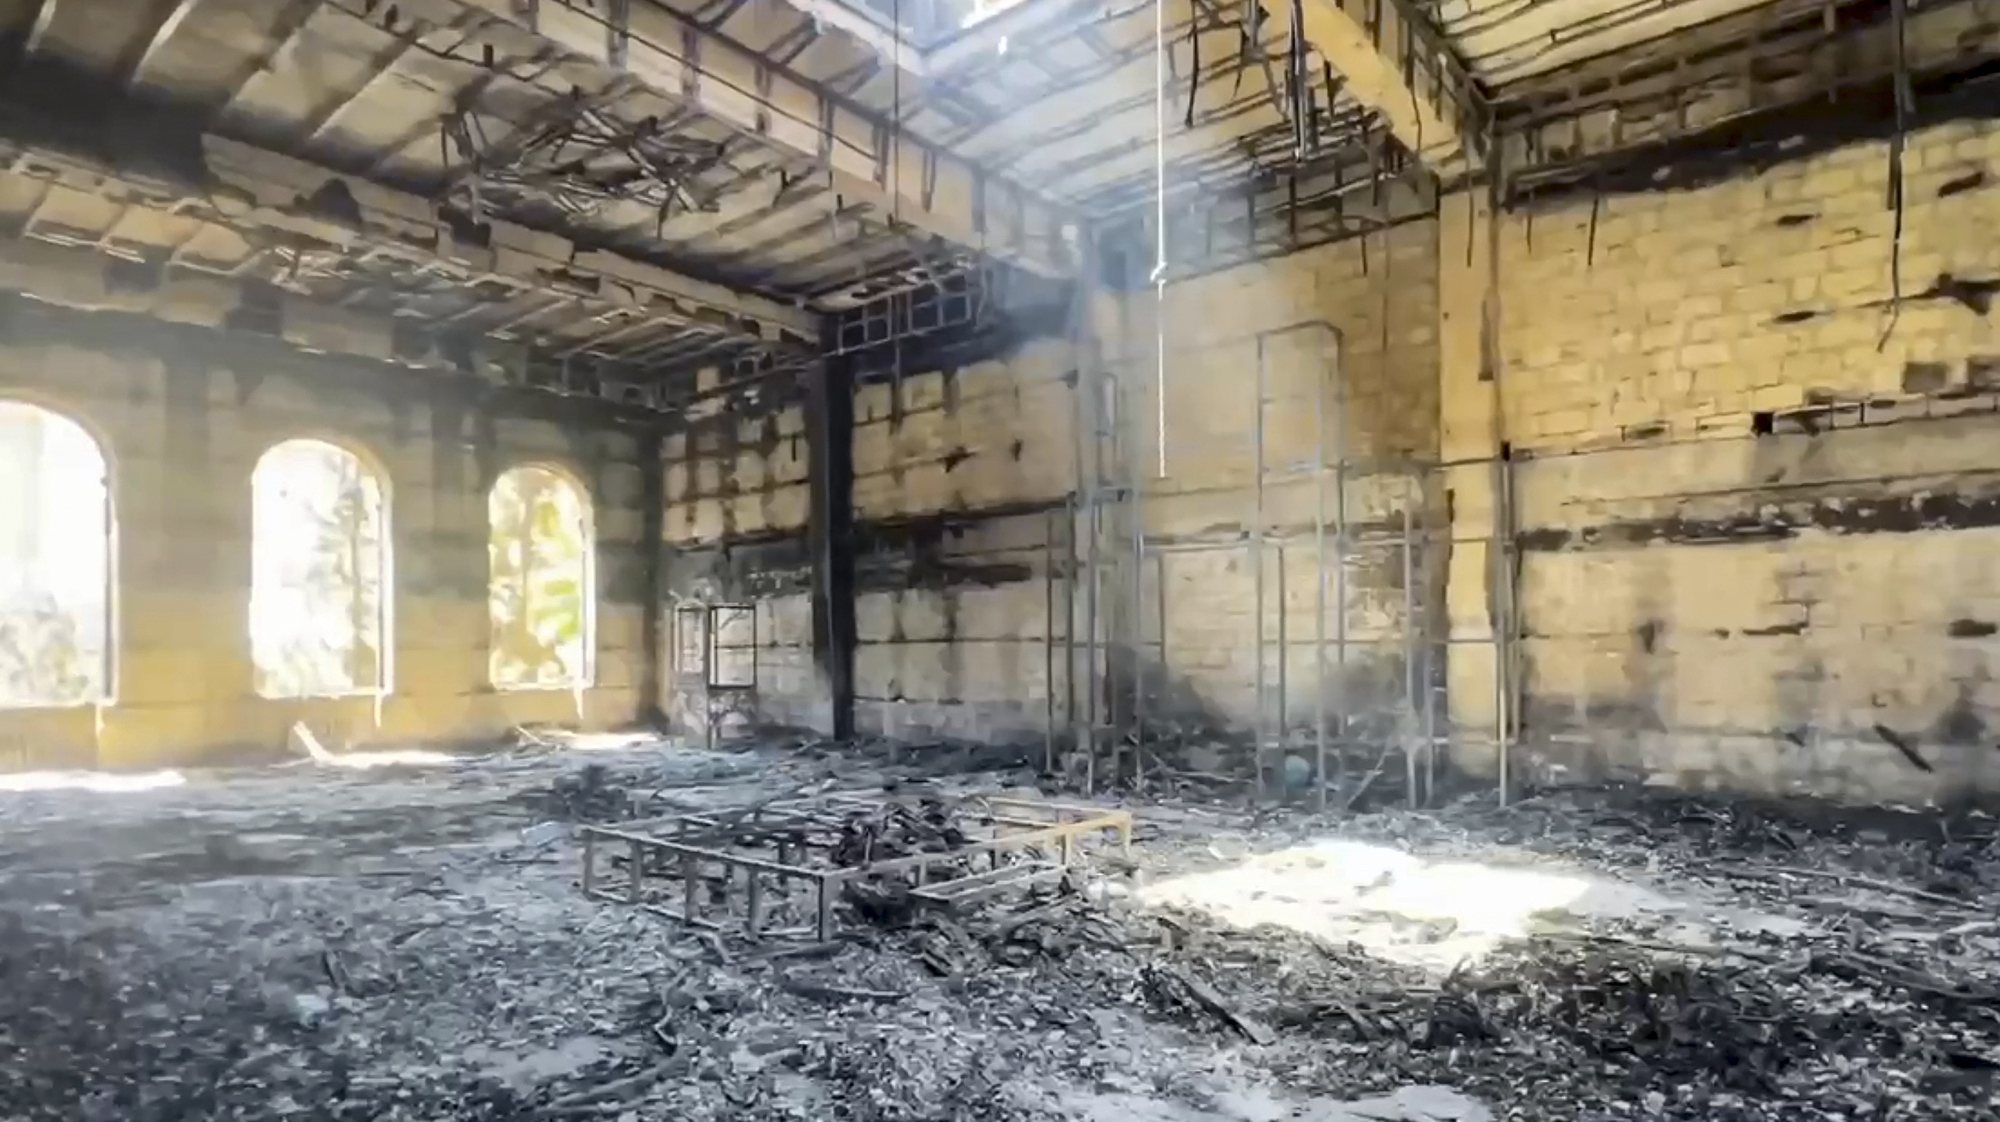 epa11433920 A handout still image taken from handout video made available on the Telegram Channel of the head of Dagestan Republic Sergey  Melikov shows damaged Kele-Numaz synagogue following a terror attack in Derbent, Republic of Dagestan, Russia, 24 June 2024. At least 15 Police officers and several other civilians were killed in attacks on two Orthodox churches, two synagogues and a traffic police station on 23 June, the head of Dagestan Sergey Melikov reported. The Dagestan National Anti-Terrorism Committee (NAC) has reported that five attackers were killed. The Committee is currently engaged in operational efforts to apprehend the remaining attackers and their aides.  EPA/TELEGRAM CHANNEL OF THE HEAD OF DAGESTAN REOUBLIC / HANDOUT BEST QUALITY AVAILABLE HANDOUT EDITORIAL USE ONLY/NO SALES HANDOUT EDITORIAL USE ONLY/NO SALES